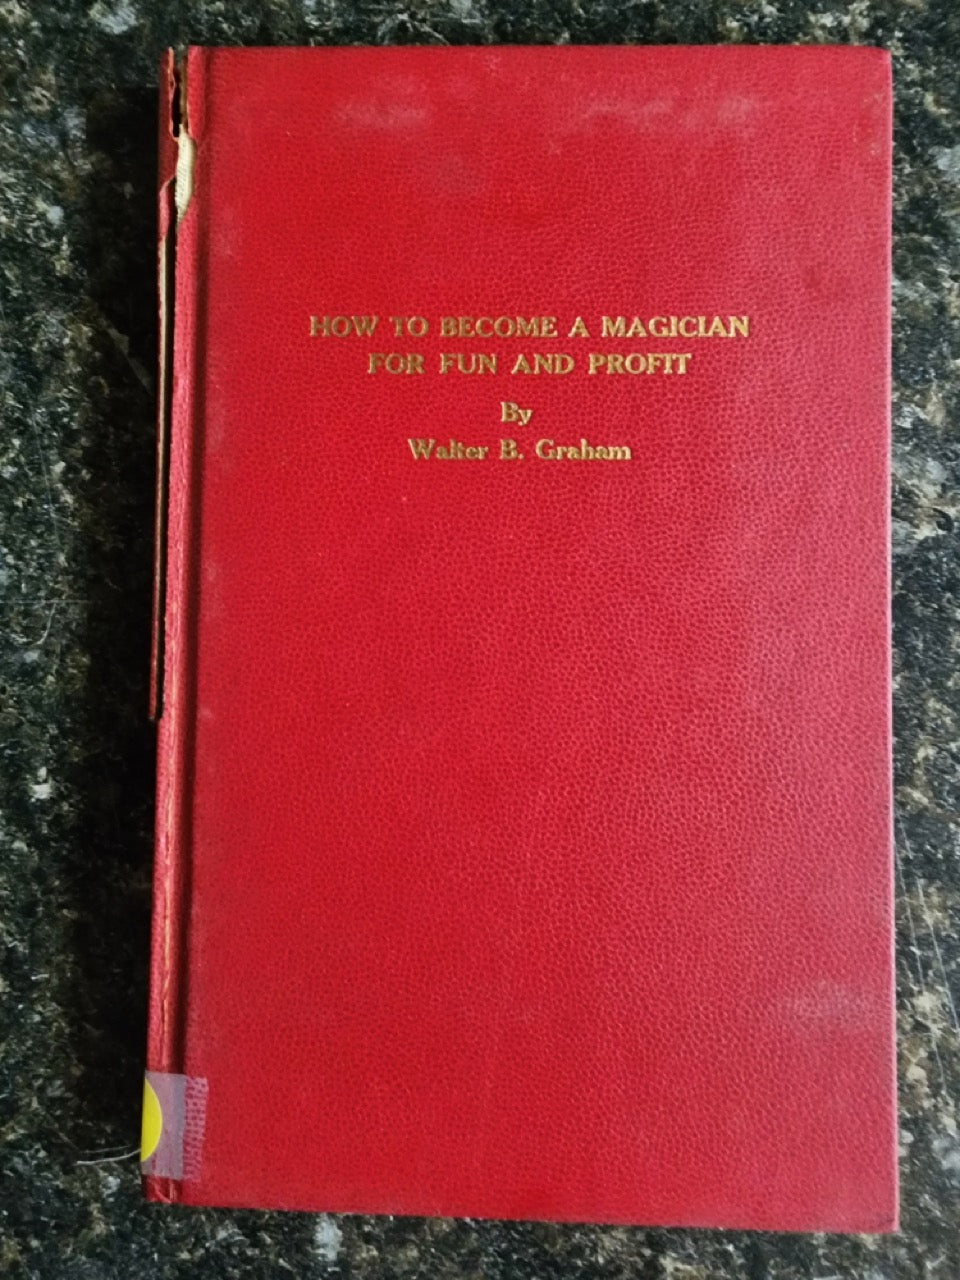 How To Become A Magician for Fun and Profit - Walter B. Graham